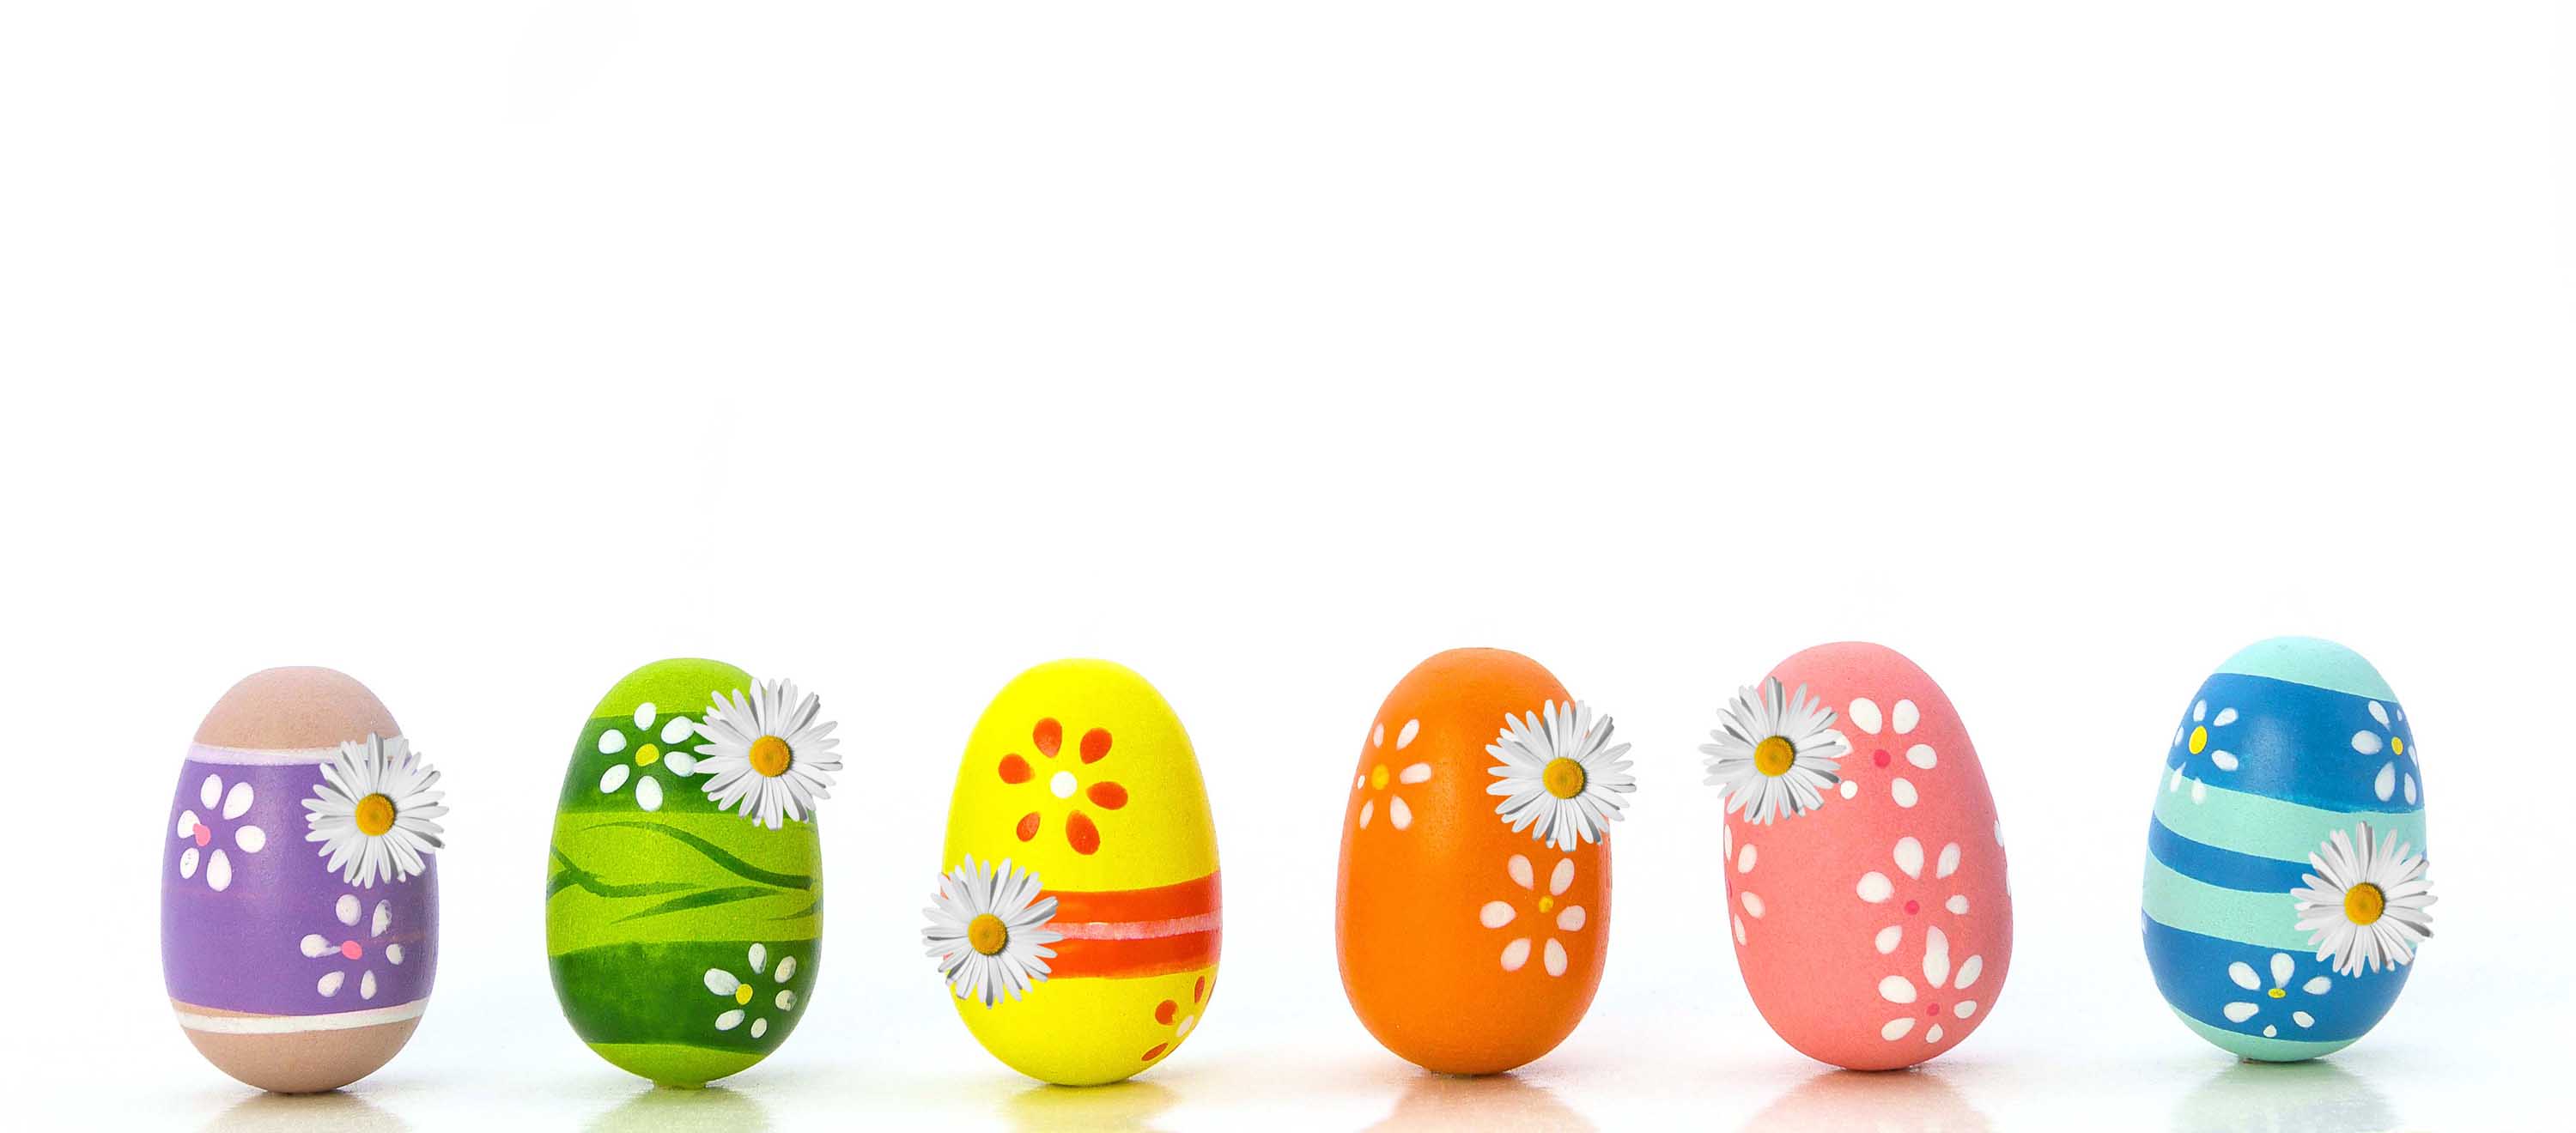 Easter Background, Wallpaper, Image, Picture. Design Trends PSD, Vector Downloads